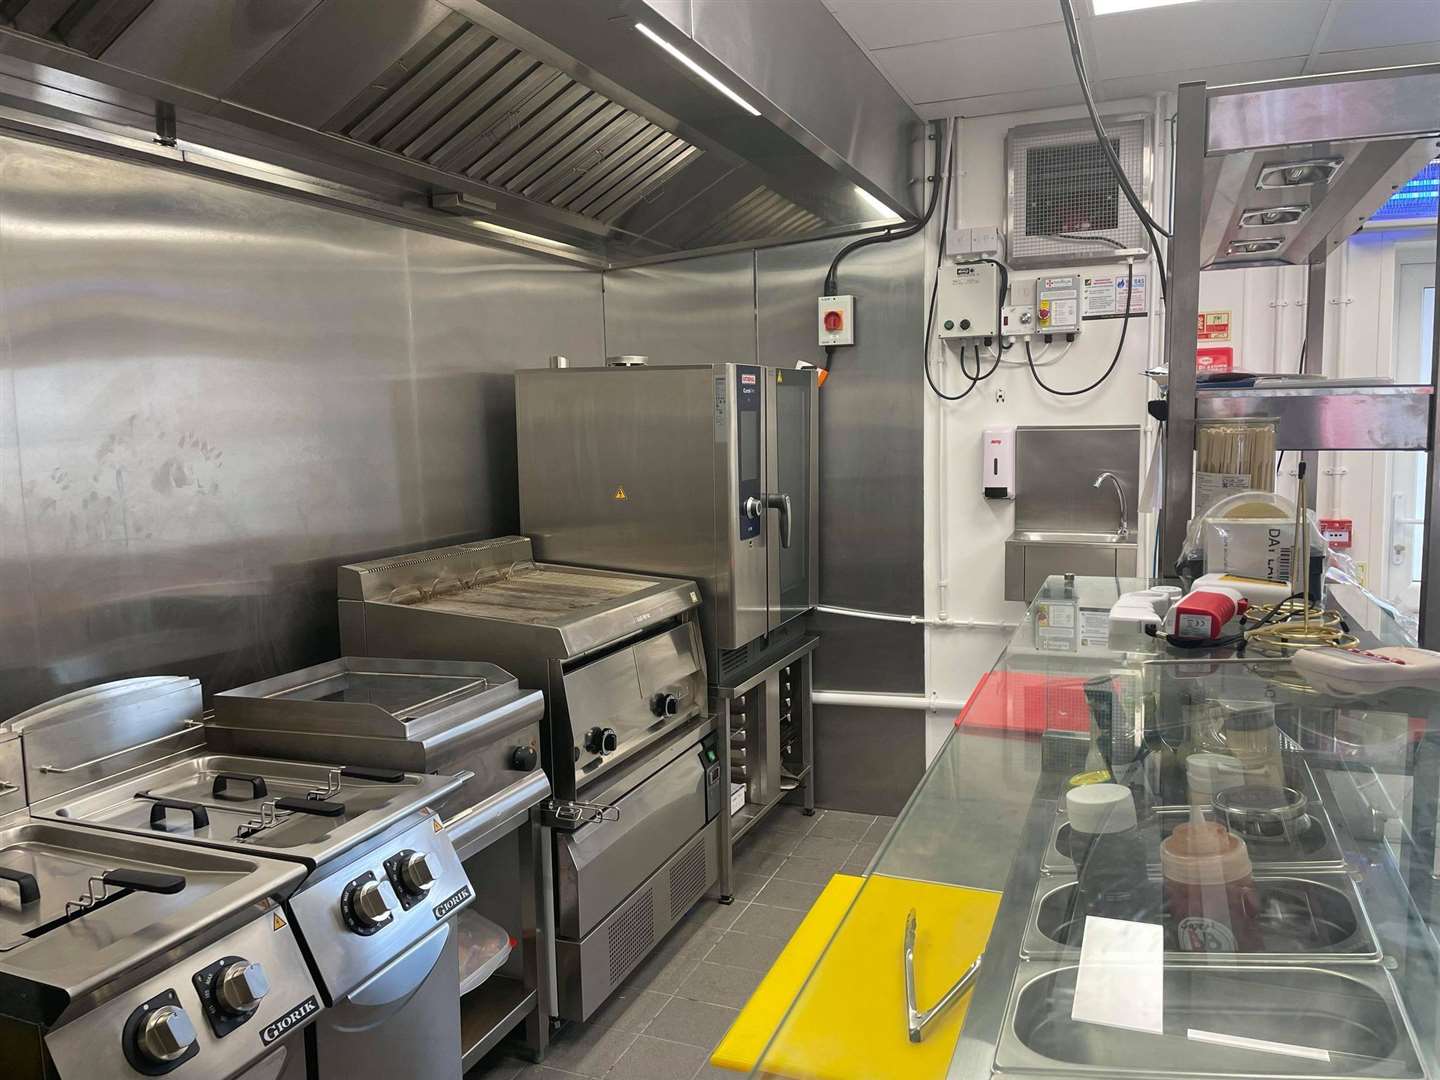 Burger Boys' kitchen is fully outfitted with brand-new equipment